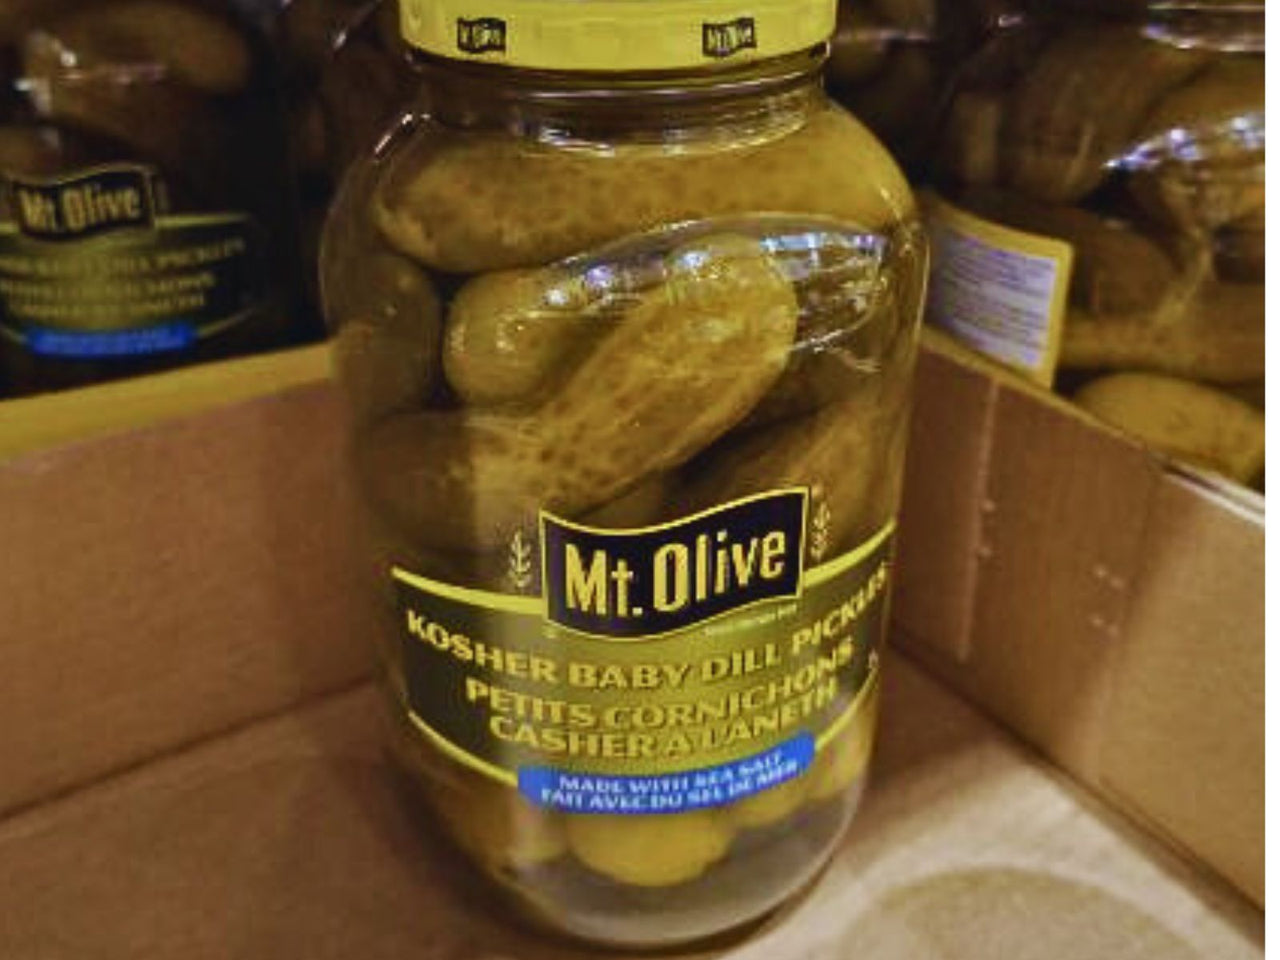 Image of Mt Olive Kosher Baby Dill Pickles